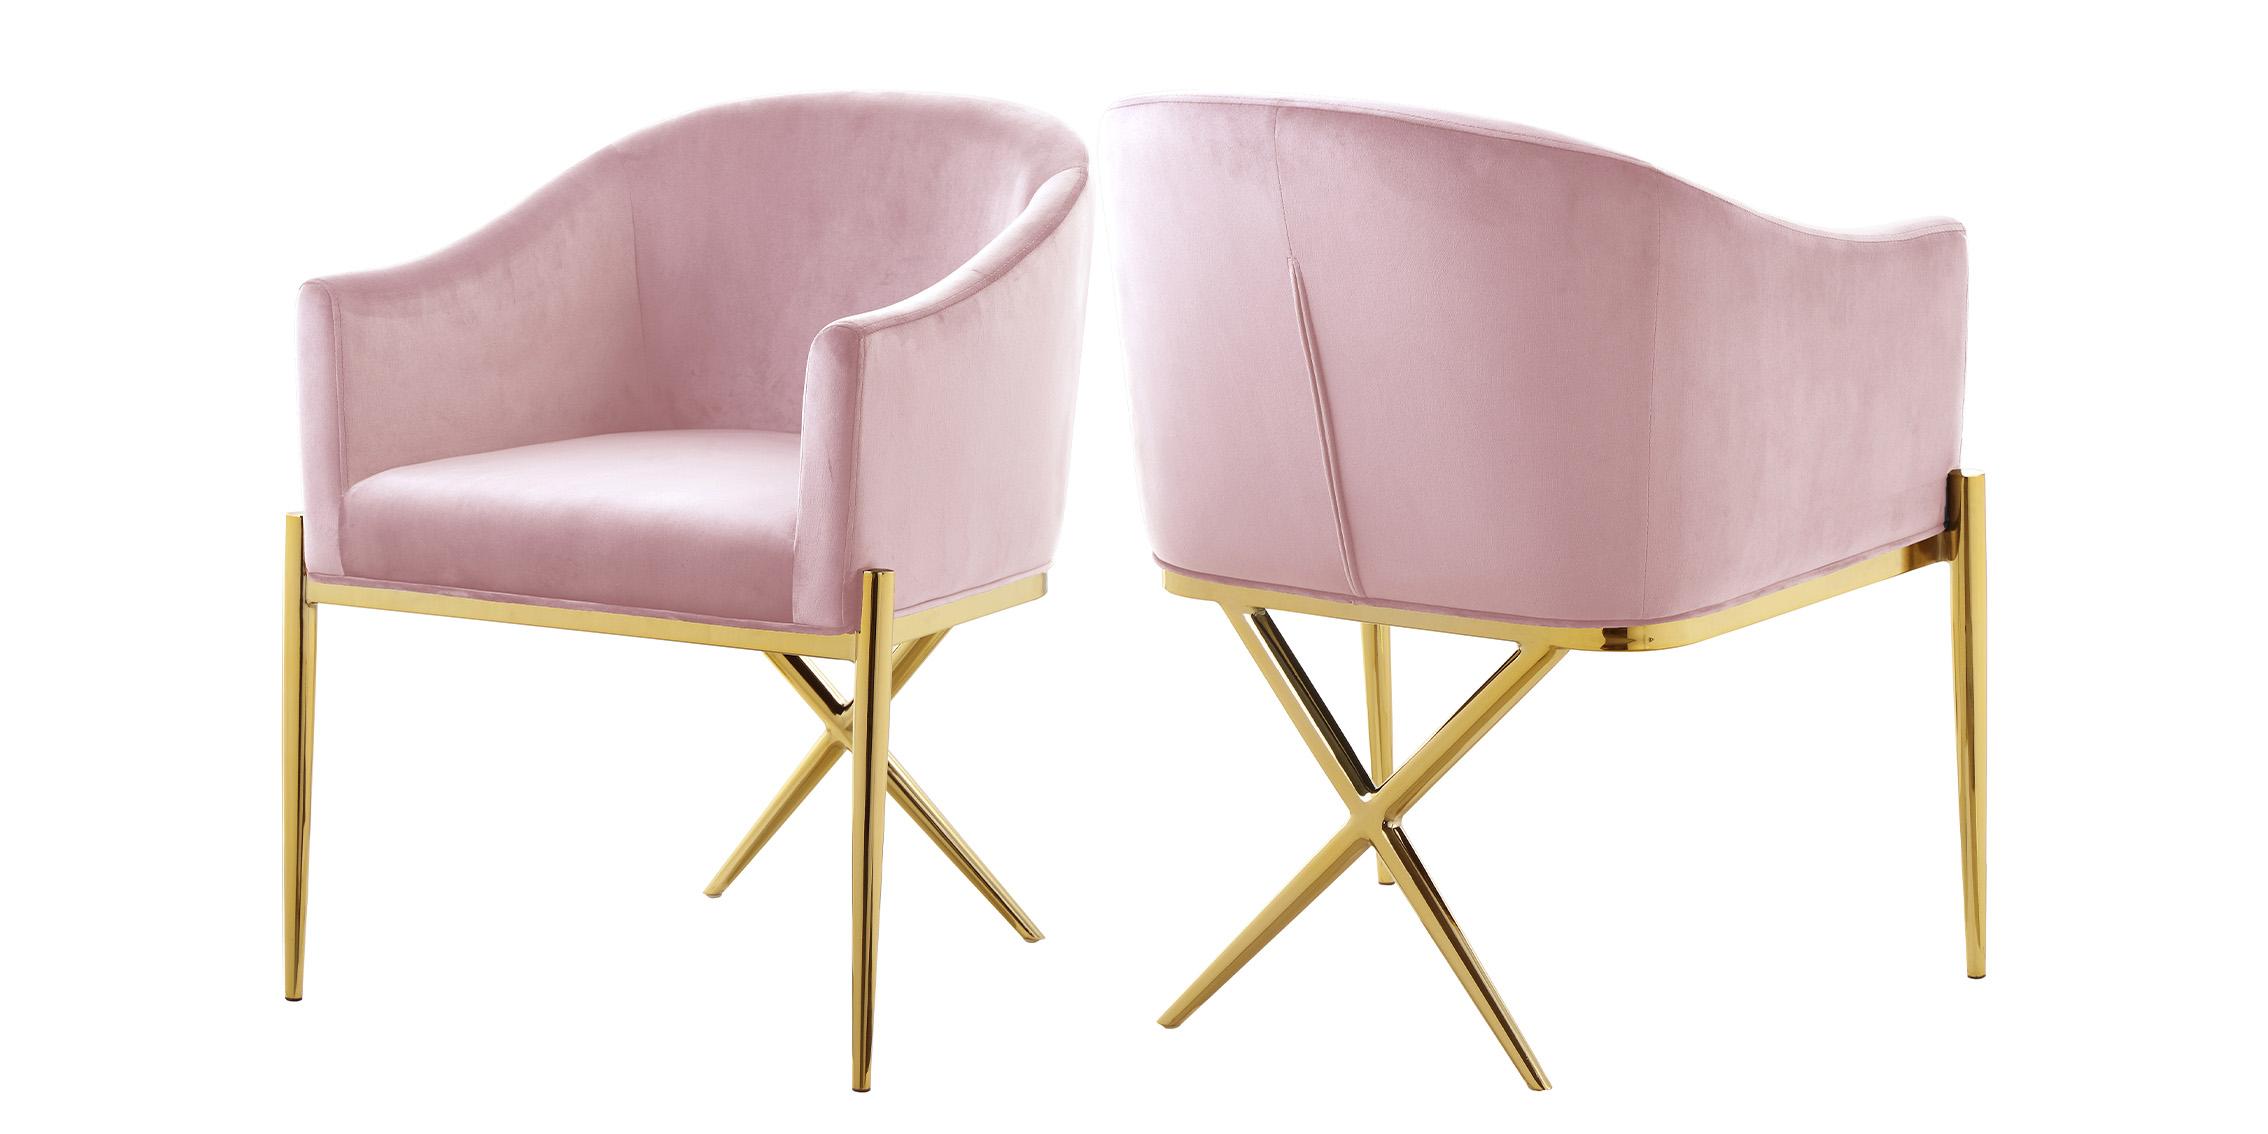 Contemporary Dining Chair Set XAVIER 763Pink-C 763Pink-C-Set-2 in Pink, Gold Velvet